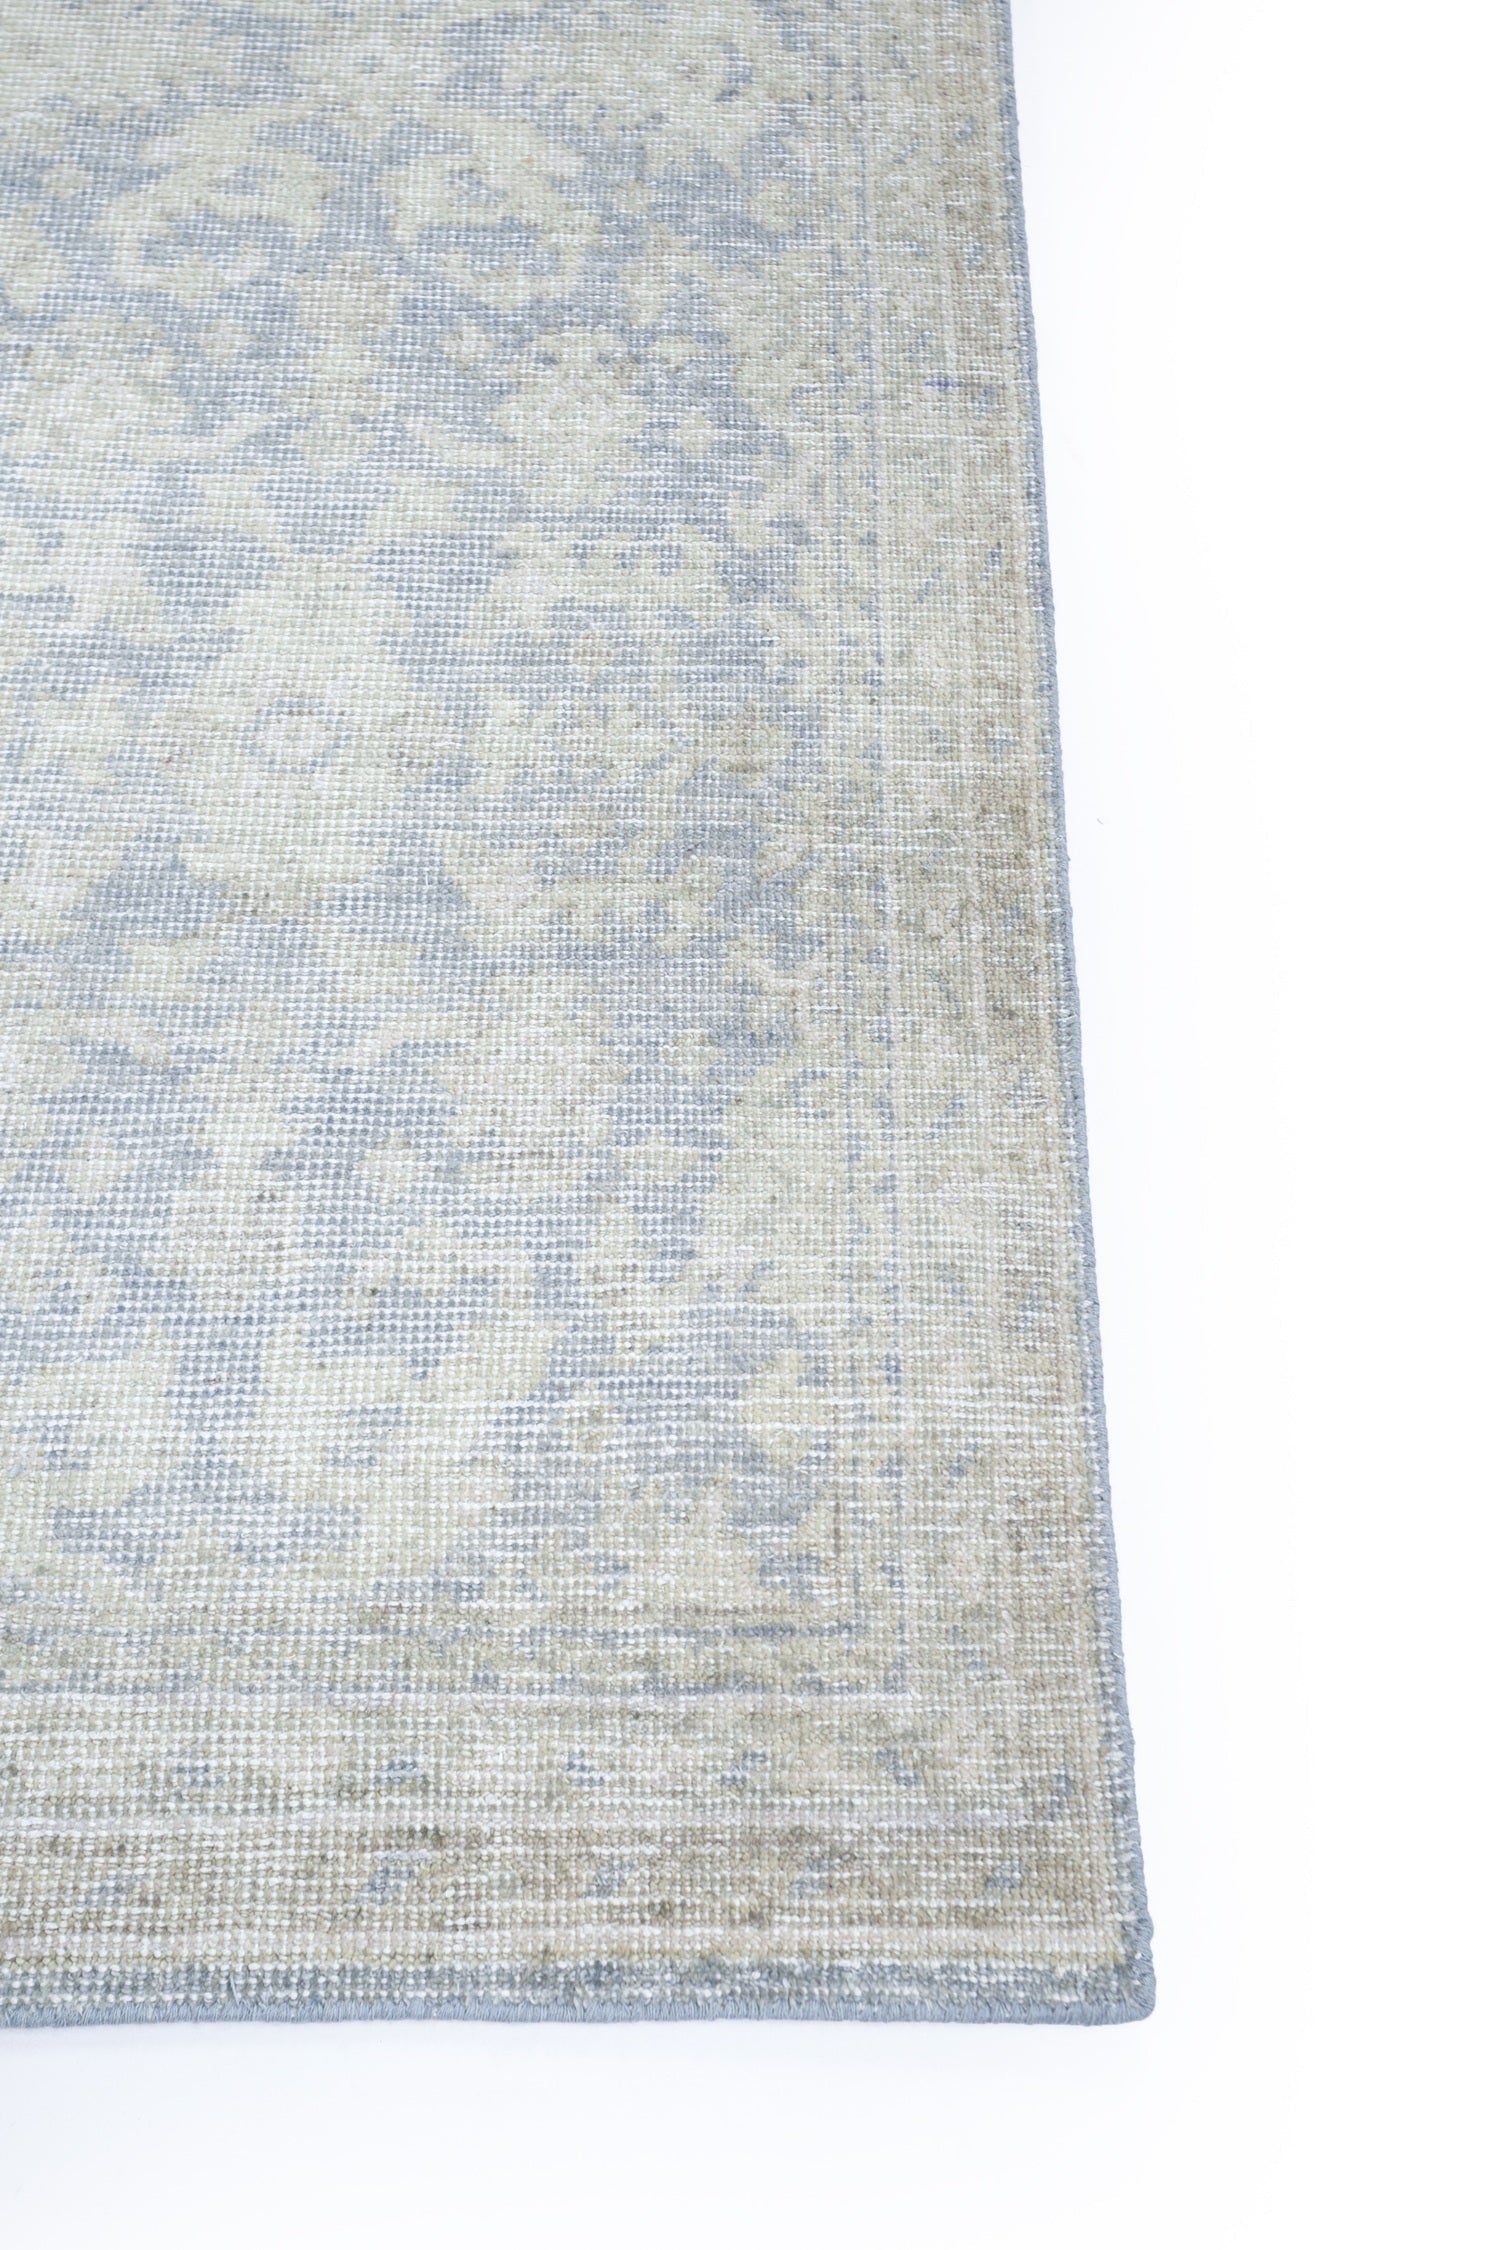 Sultanabad Handwoven Transitional Rug, J70191